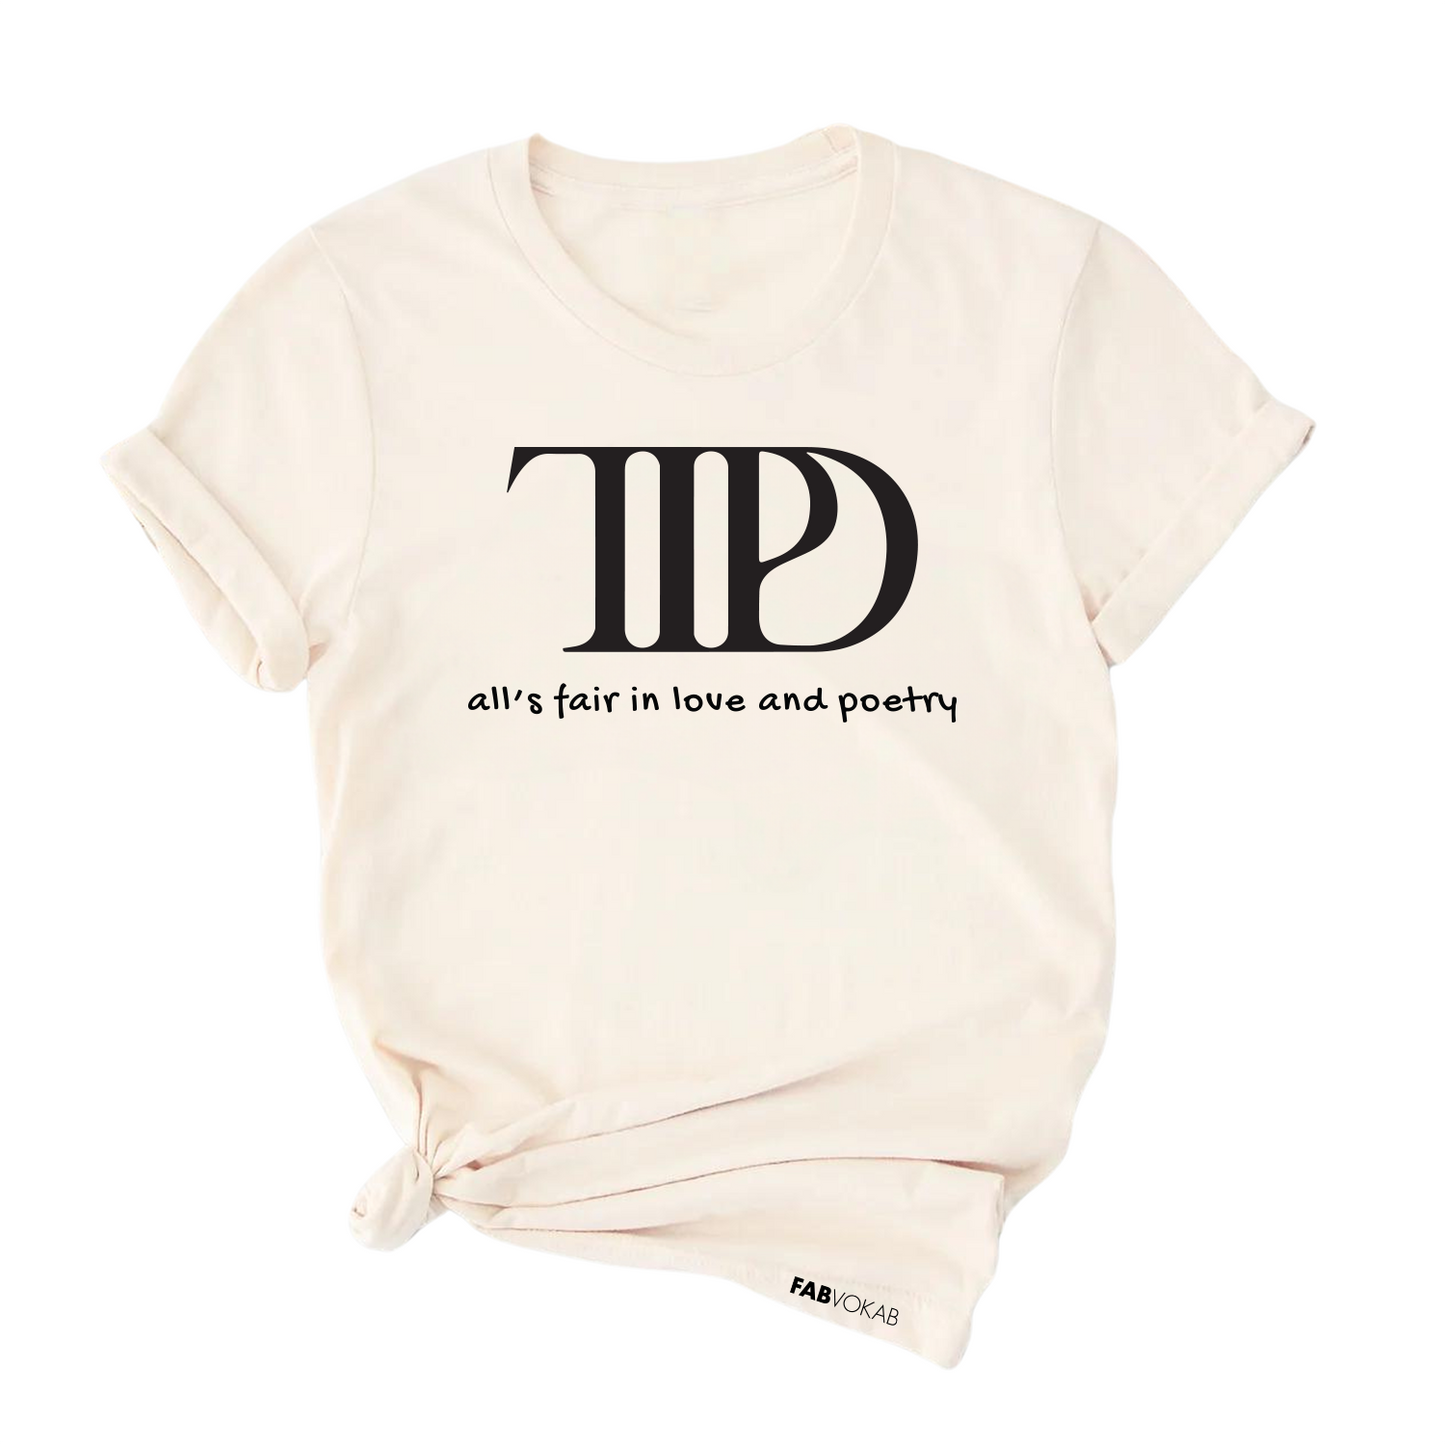 The Tortured Poets Department Girls Taylor Swift inspired T-shirt